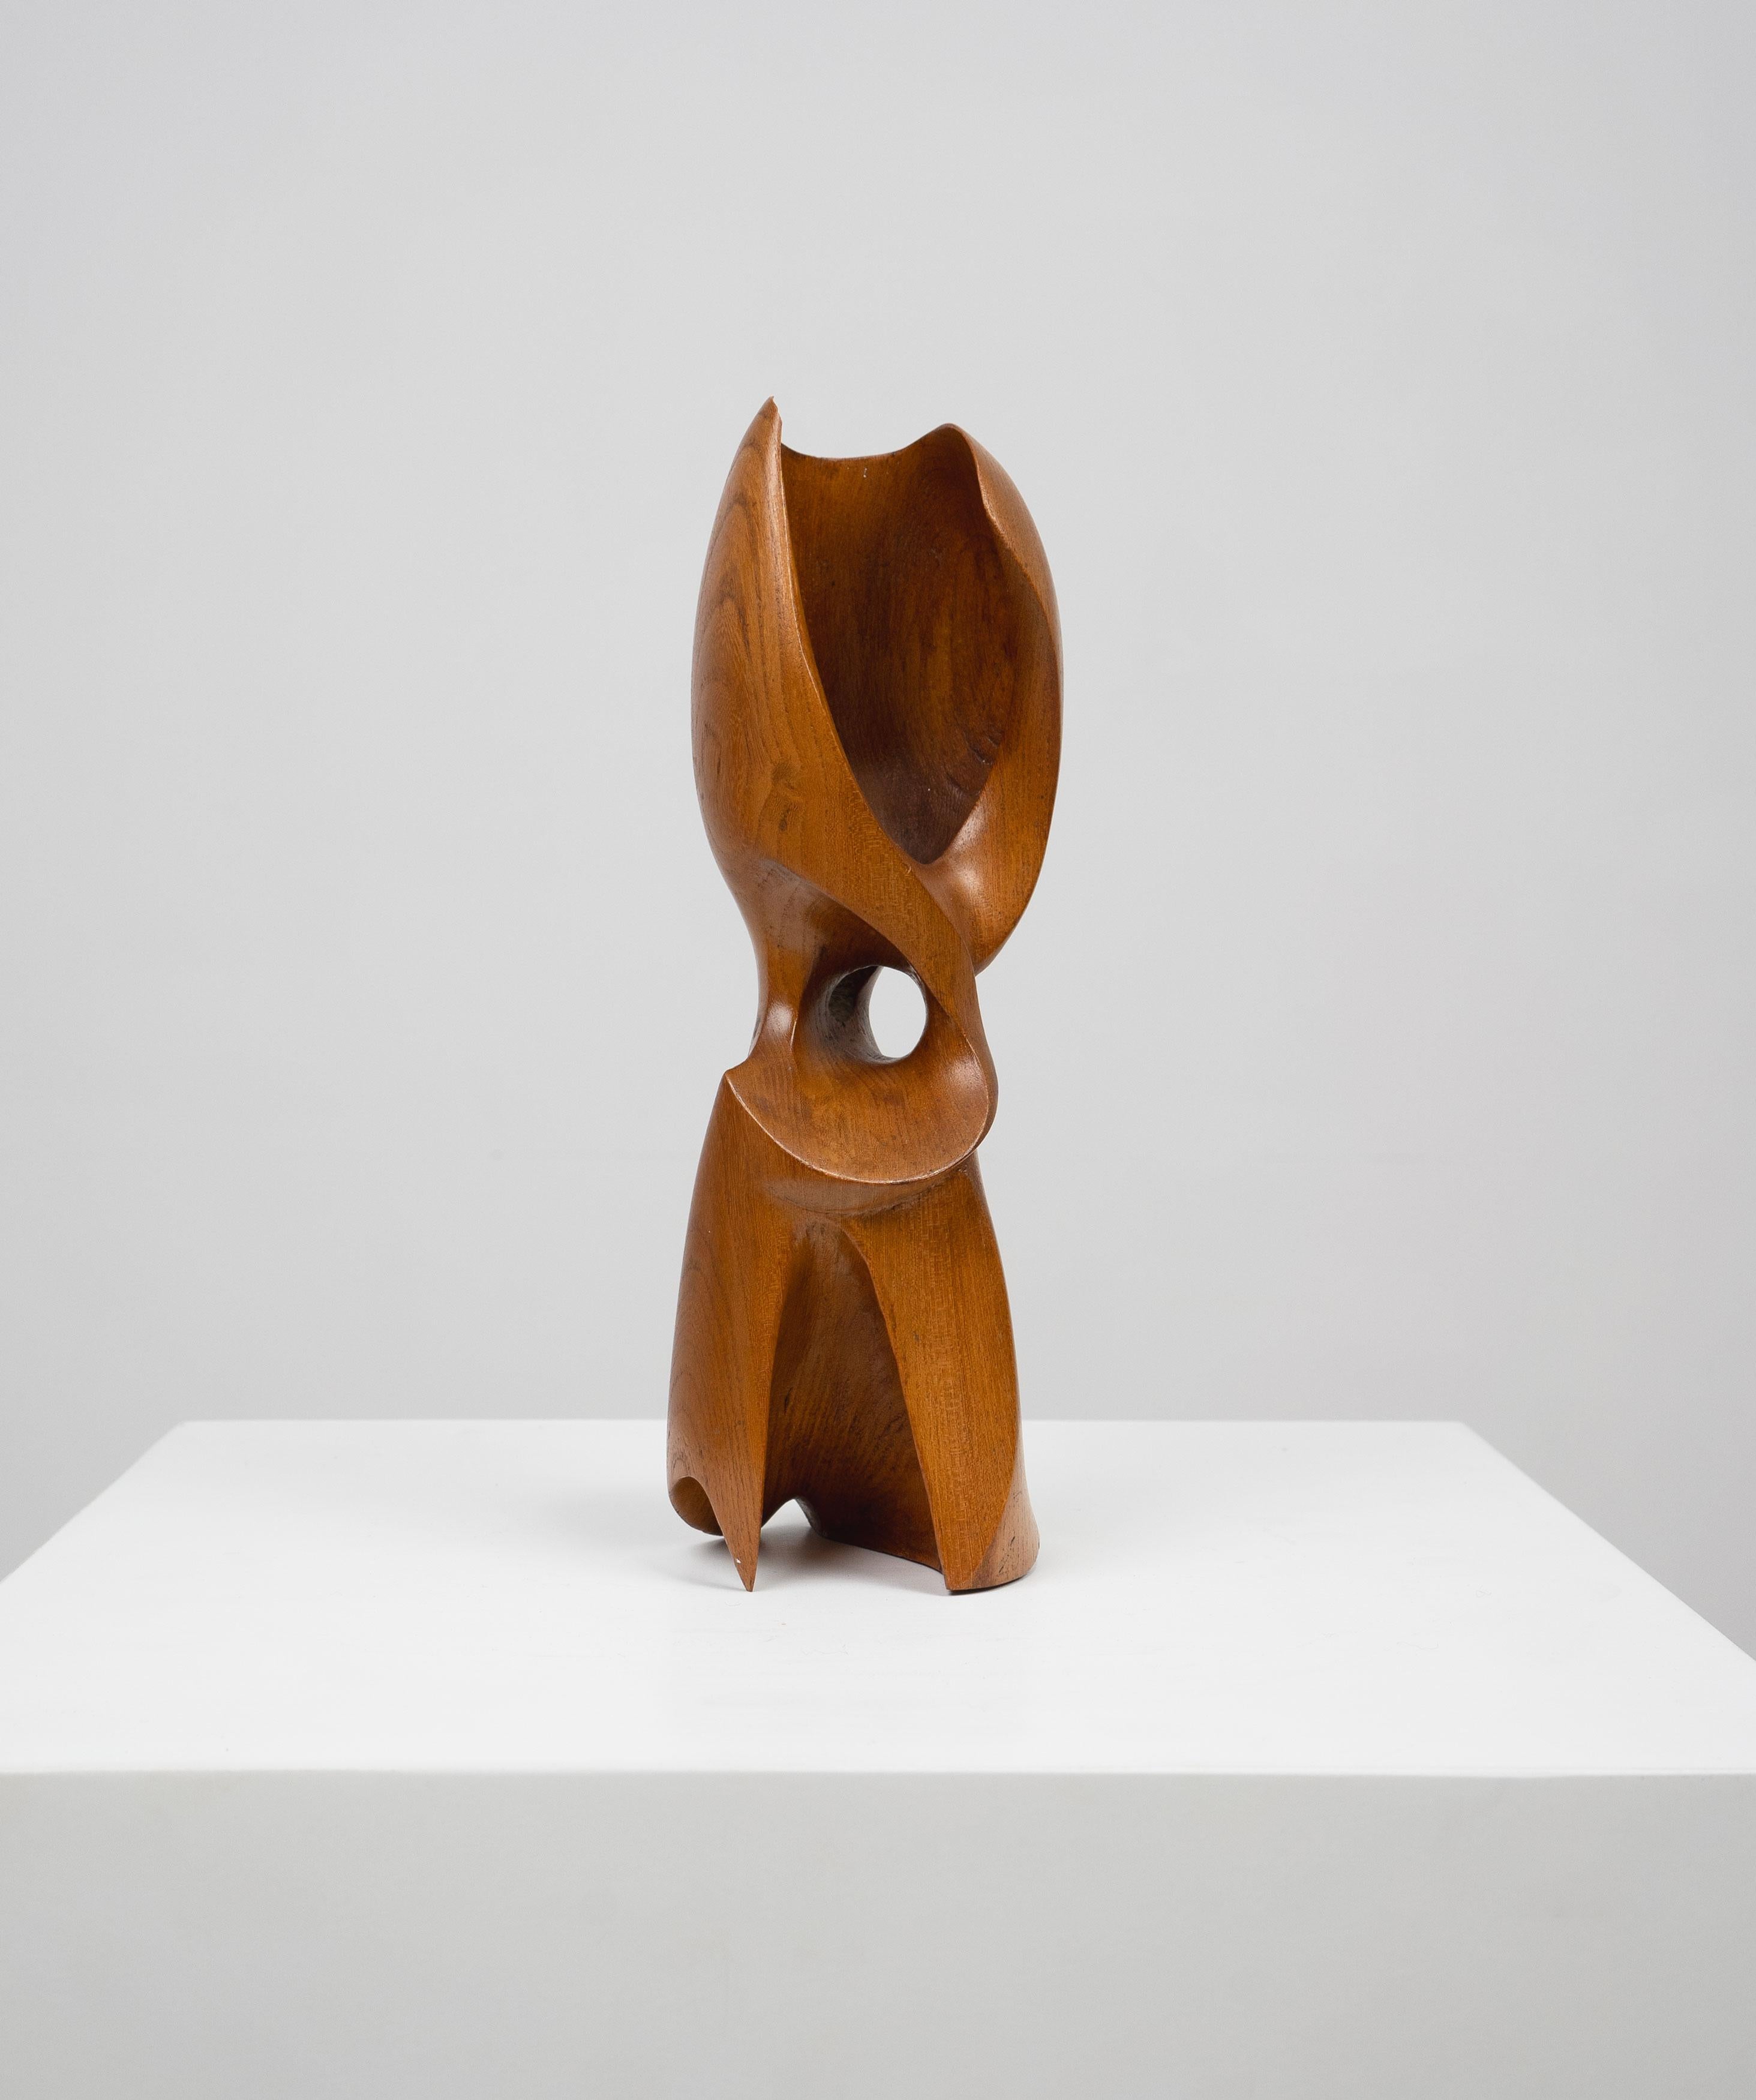 A mid 20th Century abstract sculpture in oak. 

Dimensions (cm, approx):
Height: 29
Diameter: 9
